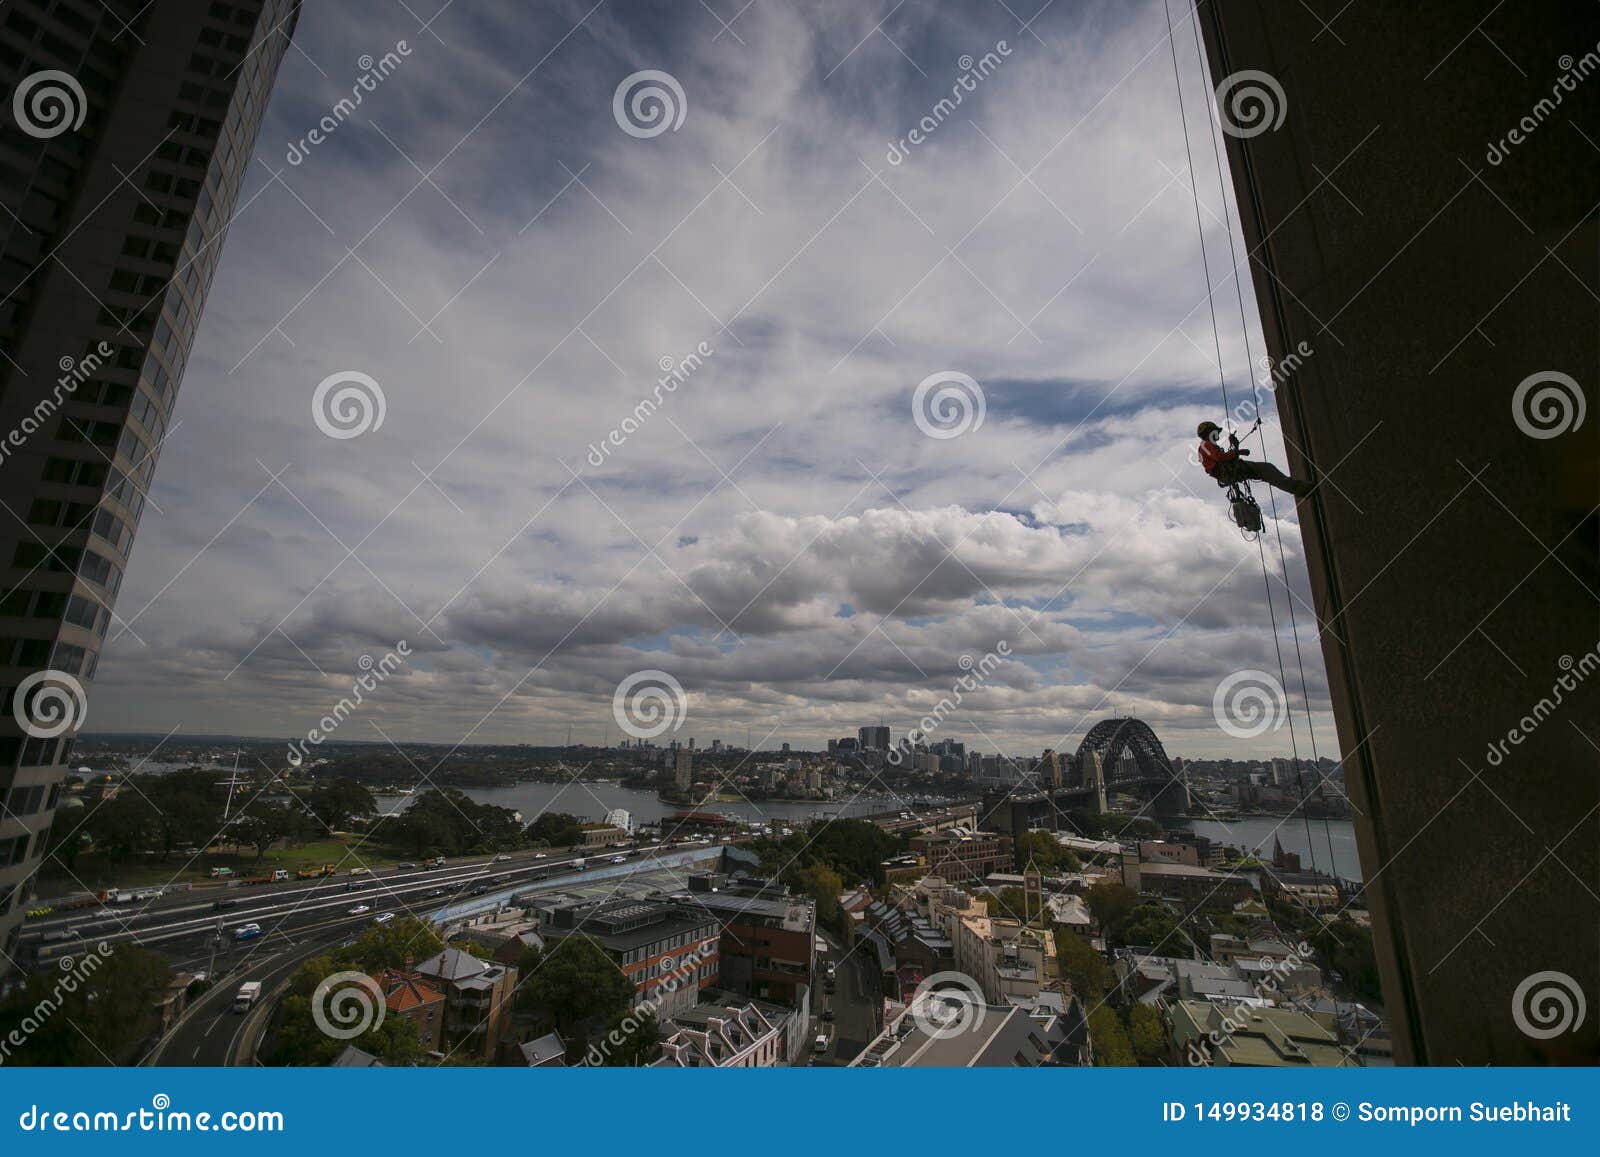 silhouette picture of construction rope access worker wearing a hard hat, full body safety harness working at height, abseiling